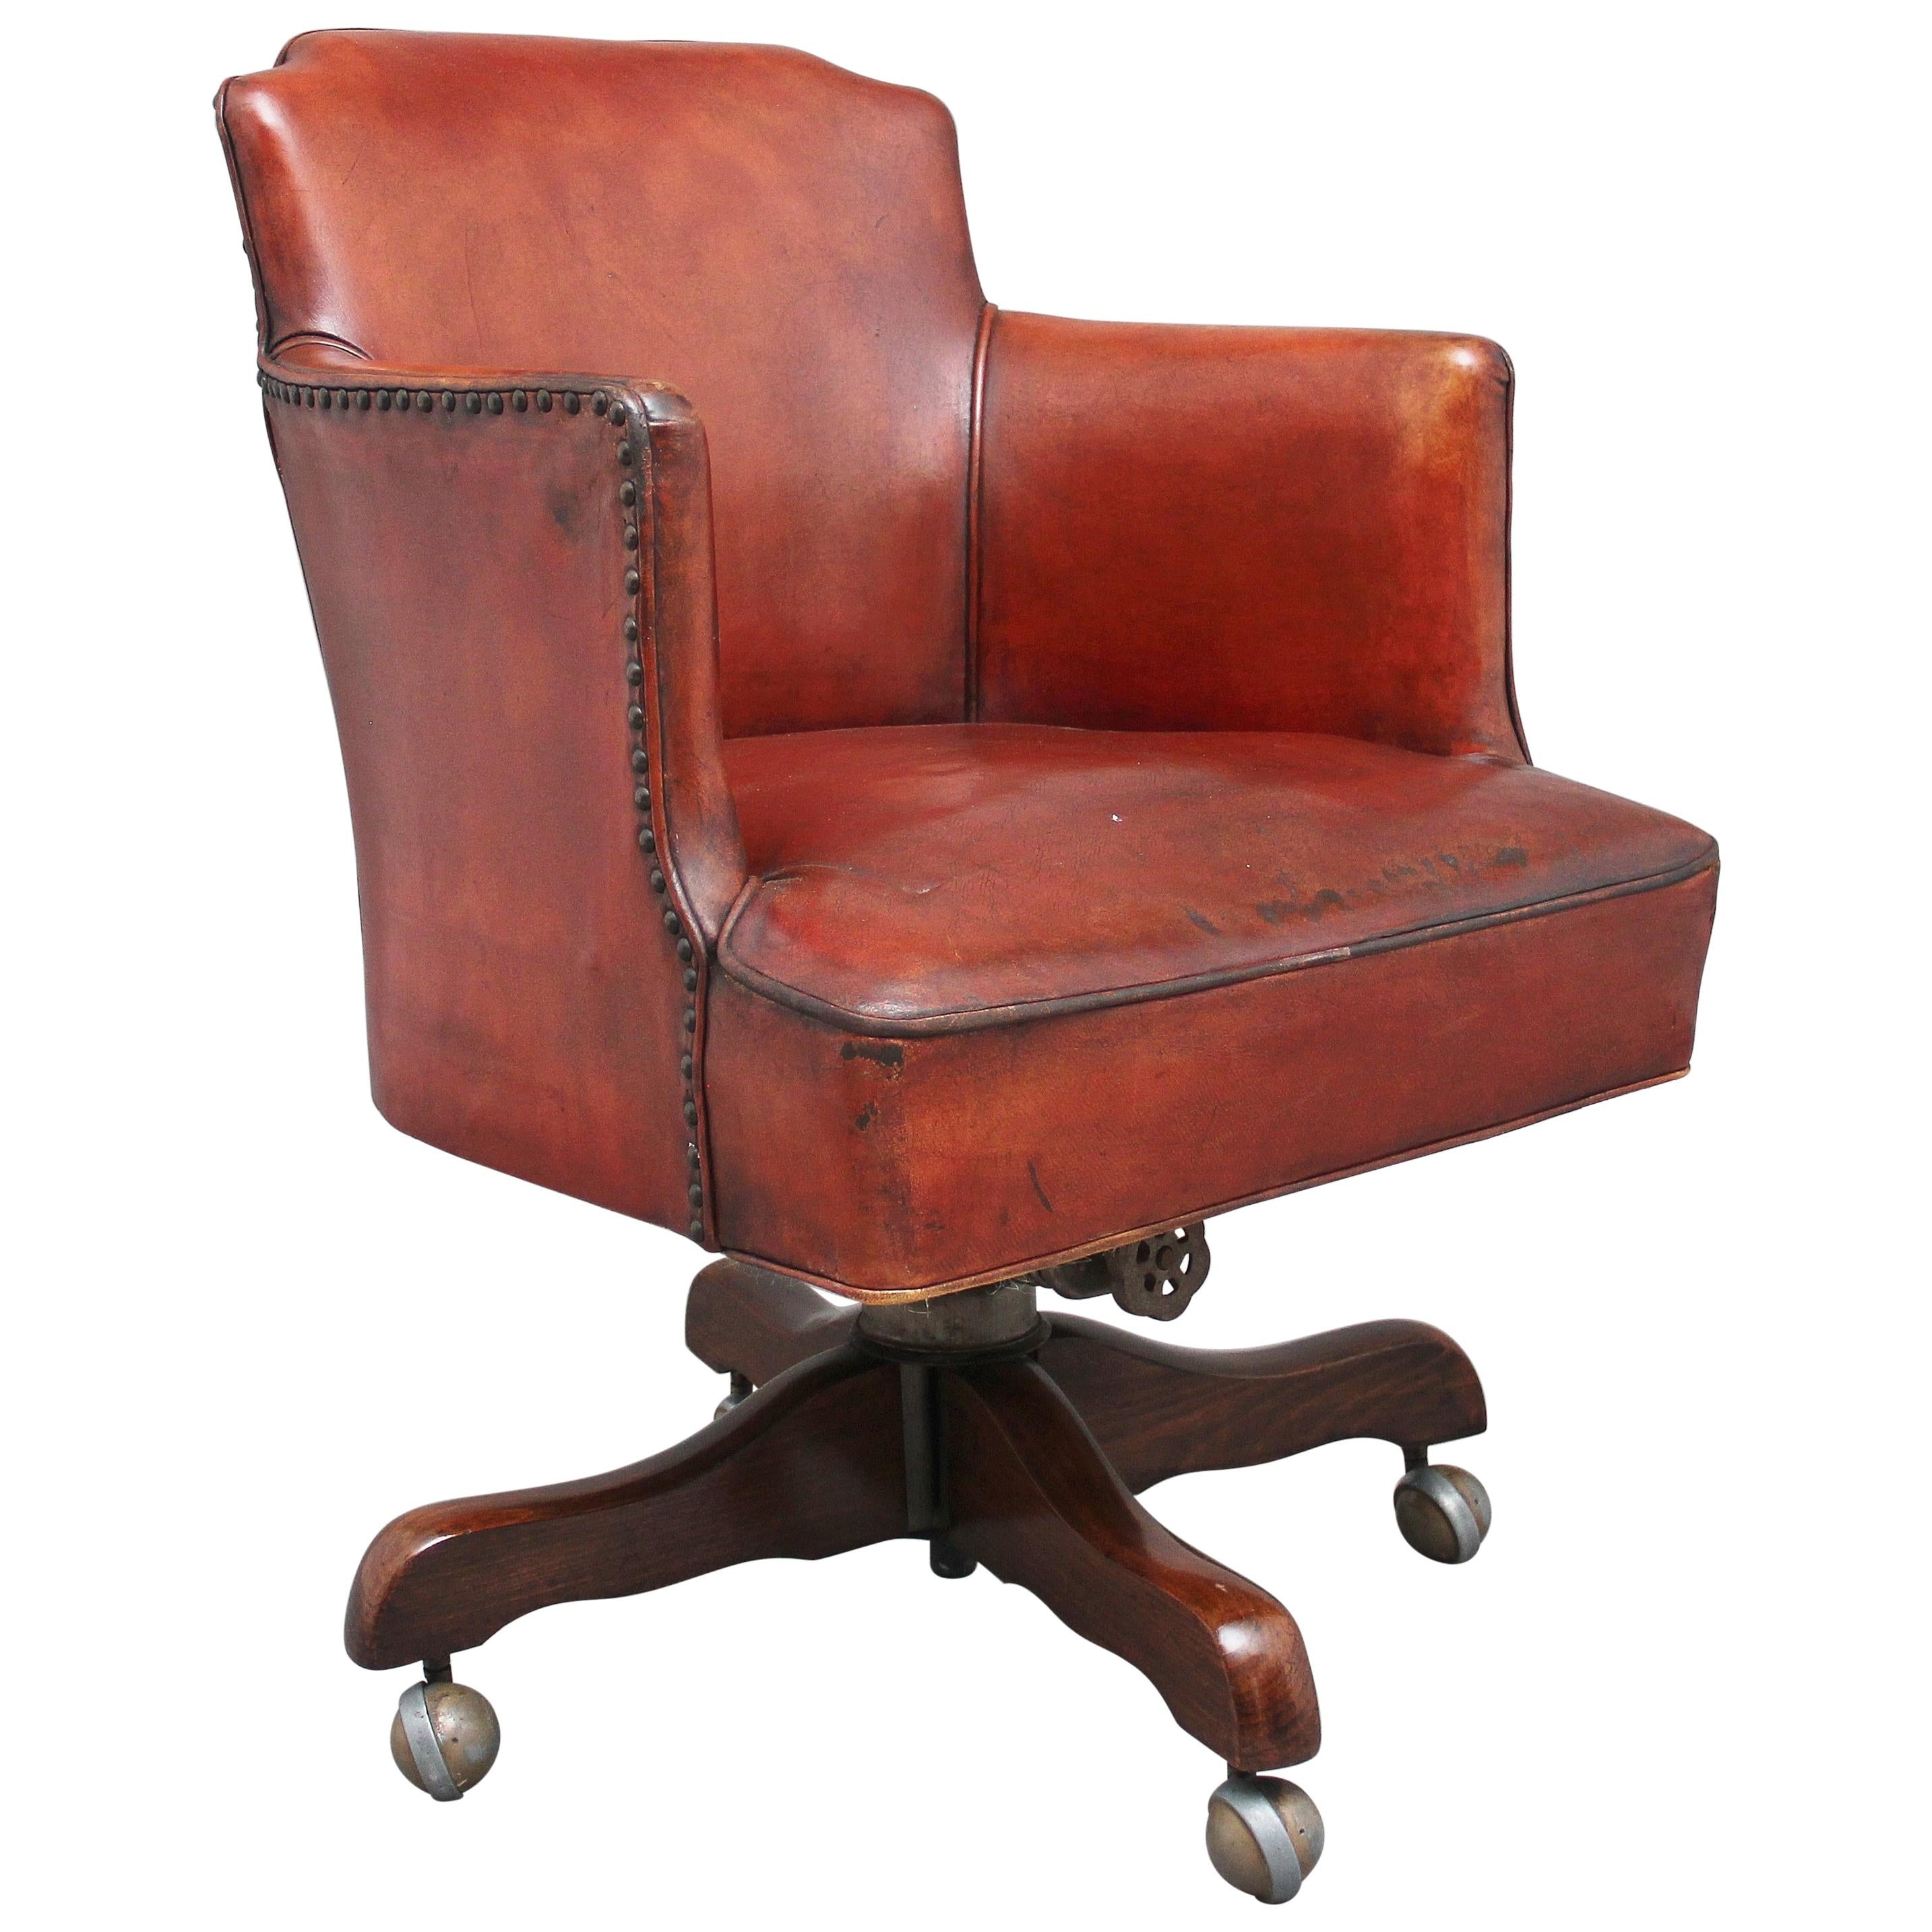 Mid-20th Century Leather Swivel Desk Chair